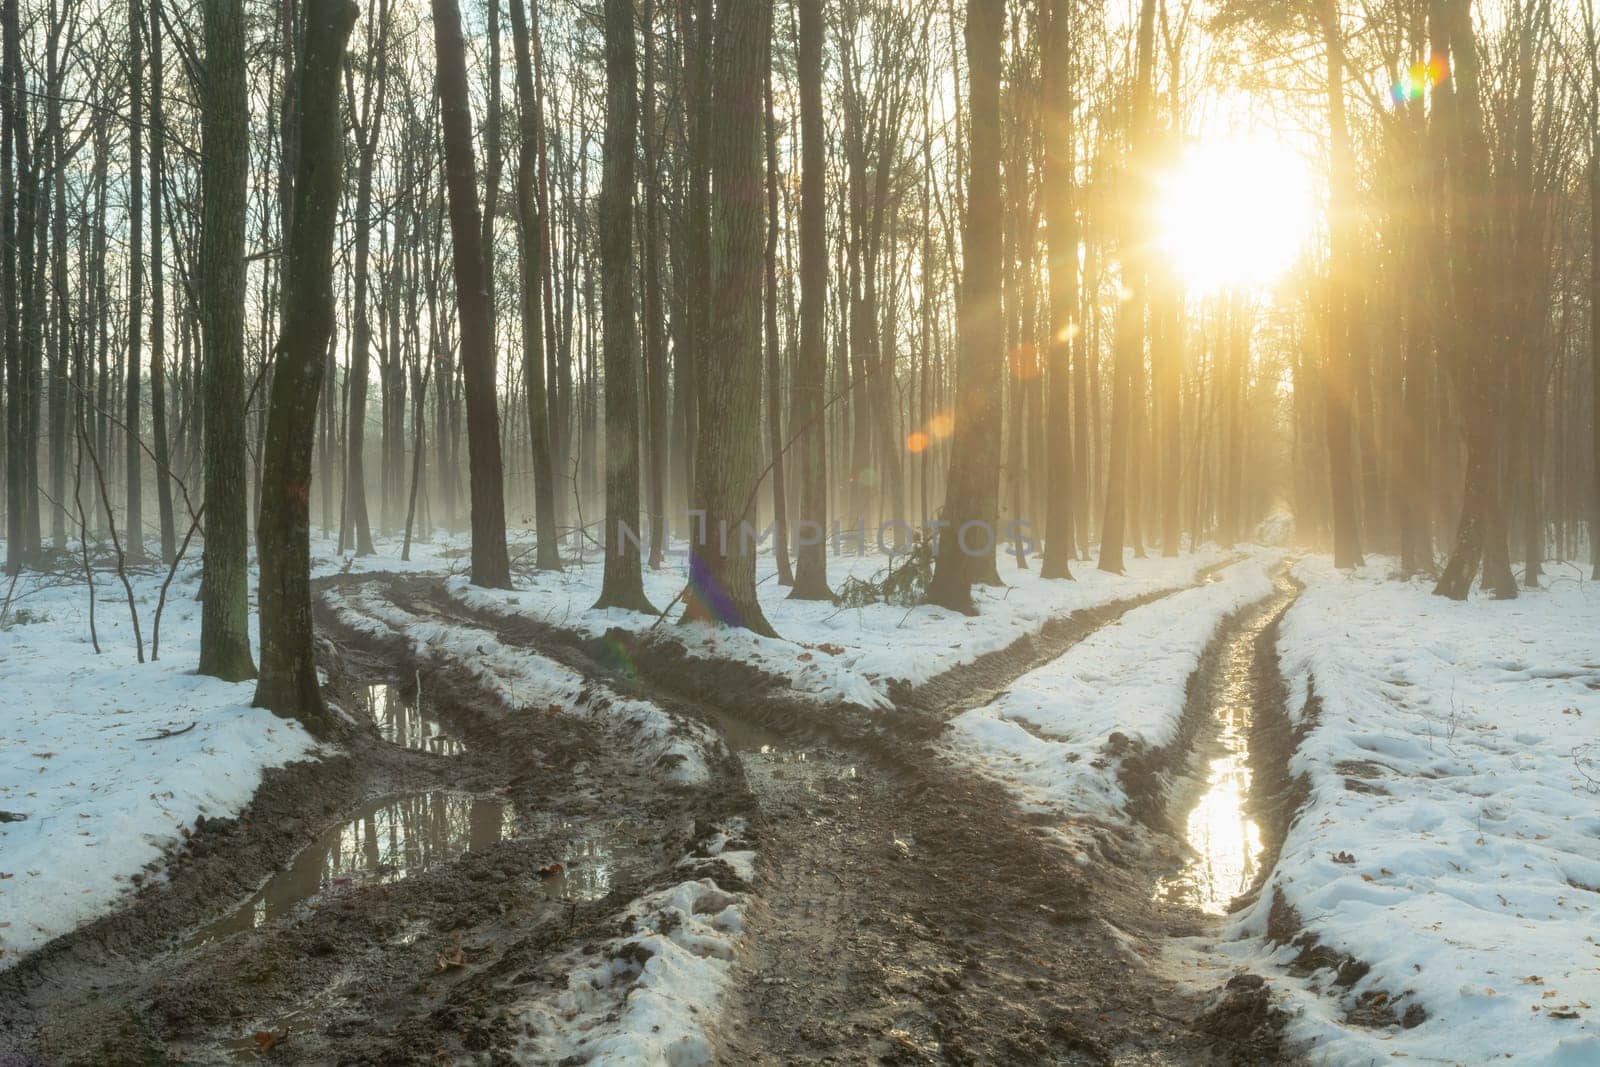 Glow of the sun with winter forest and muddy road fork by darekb22